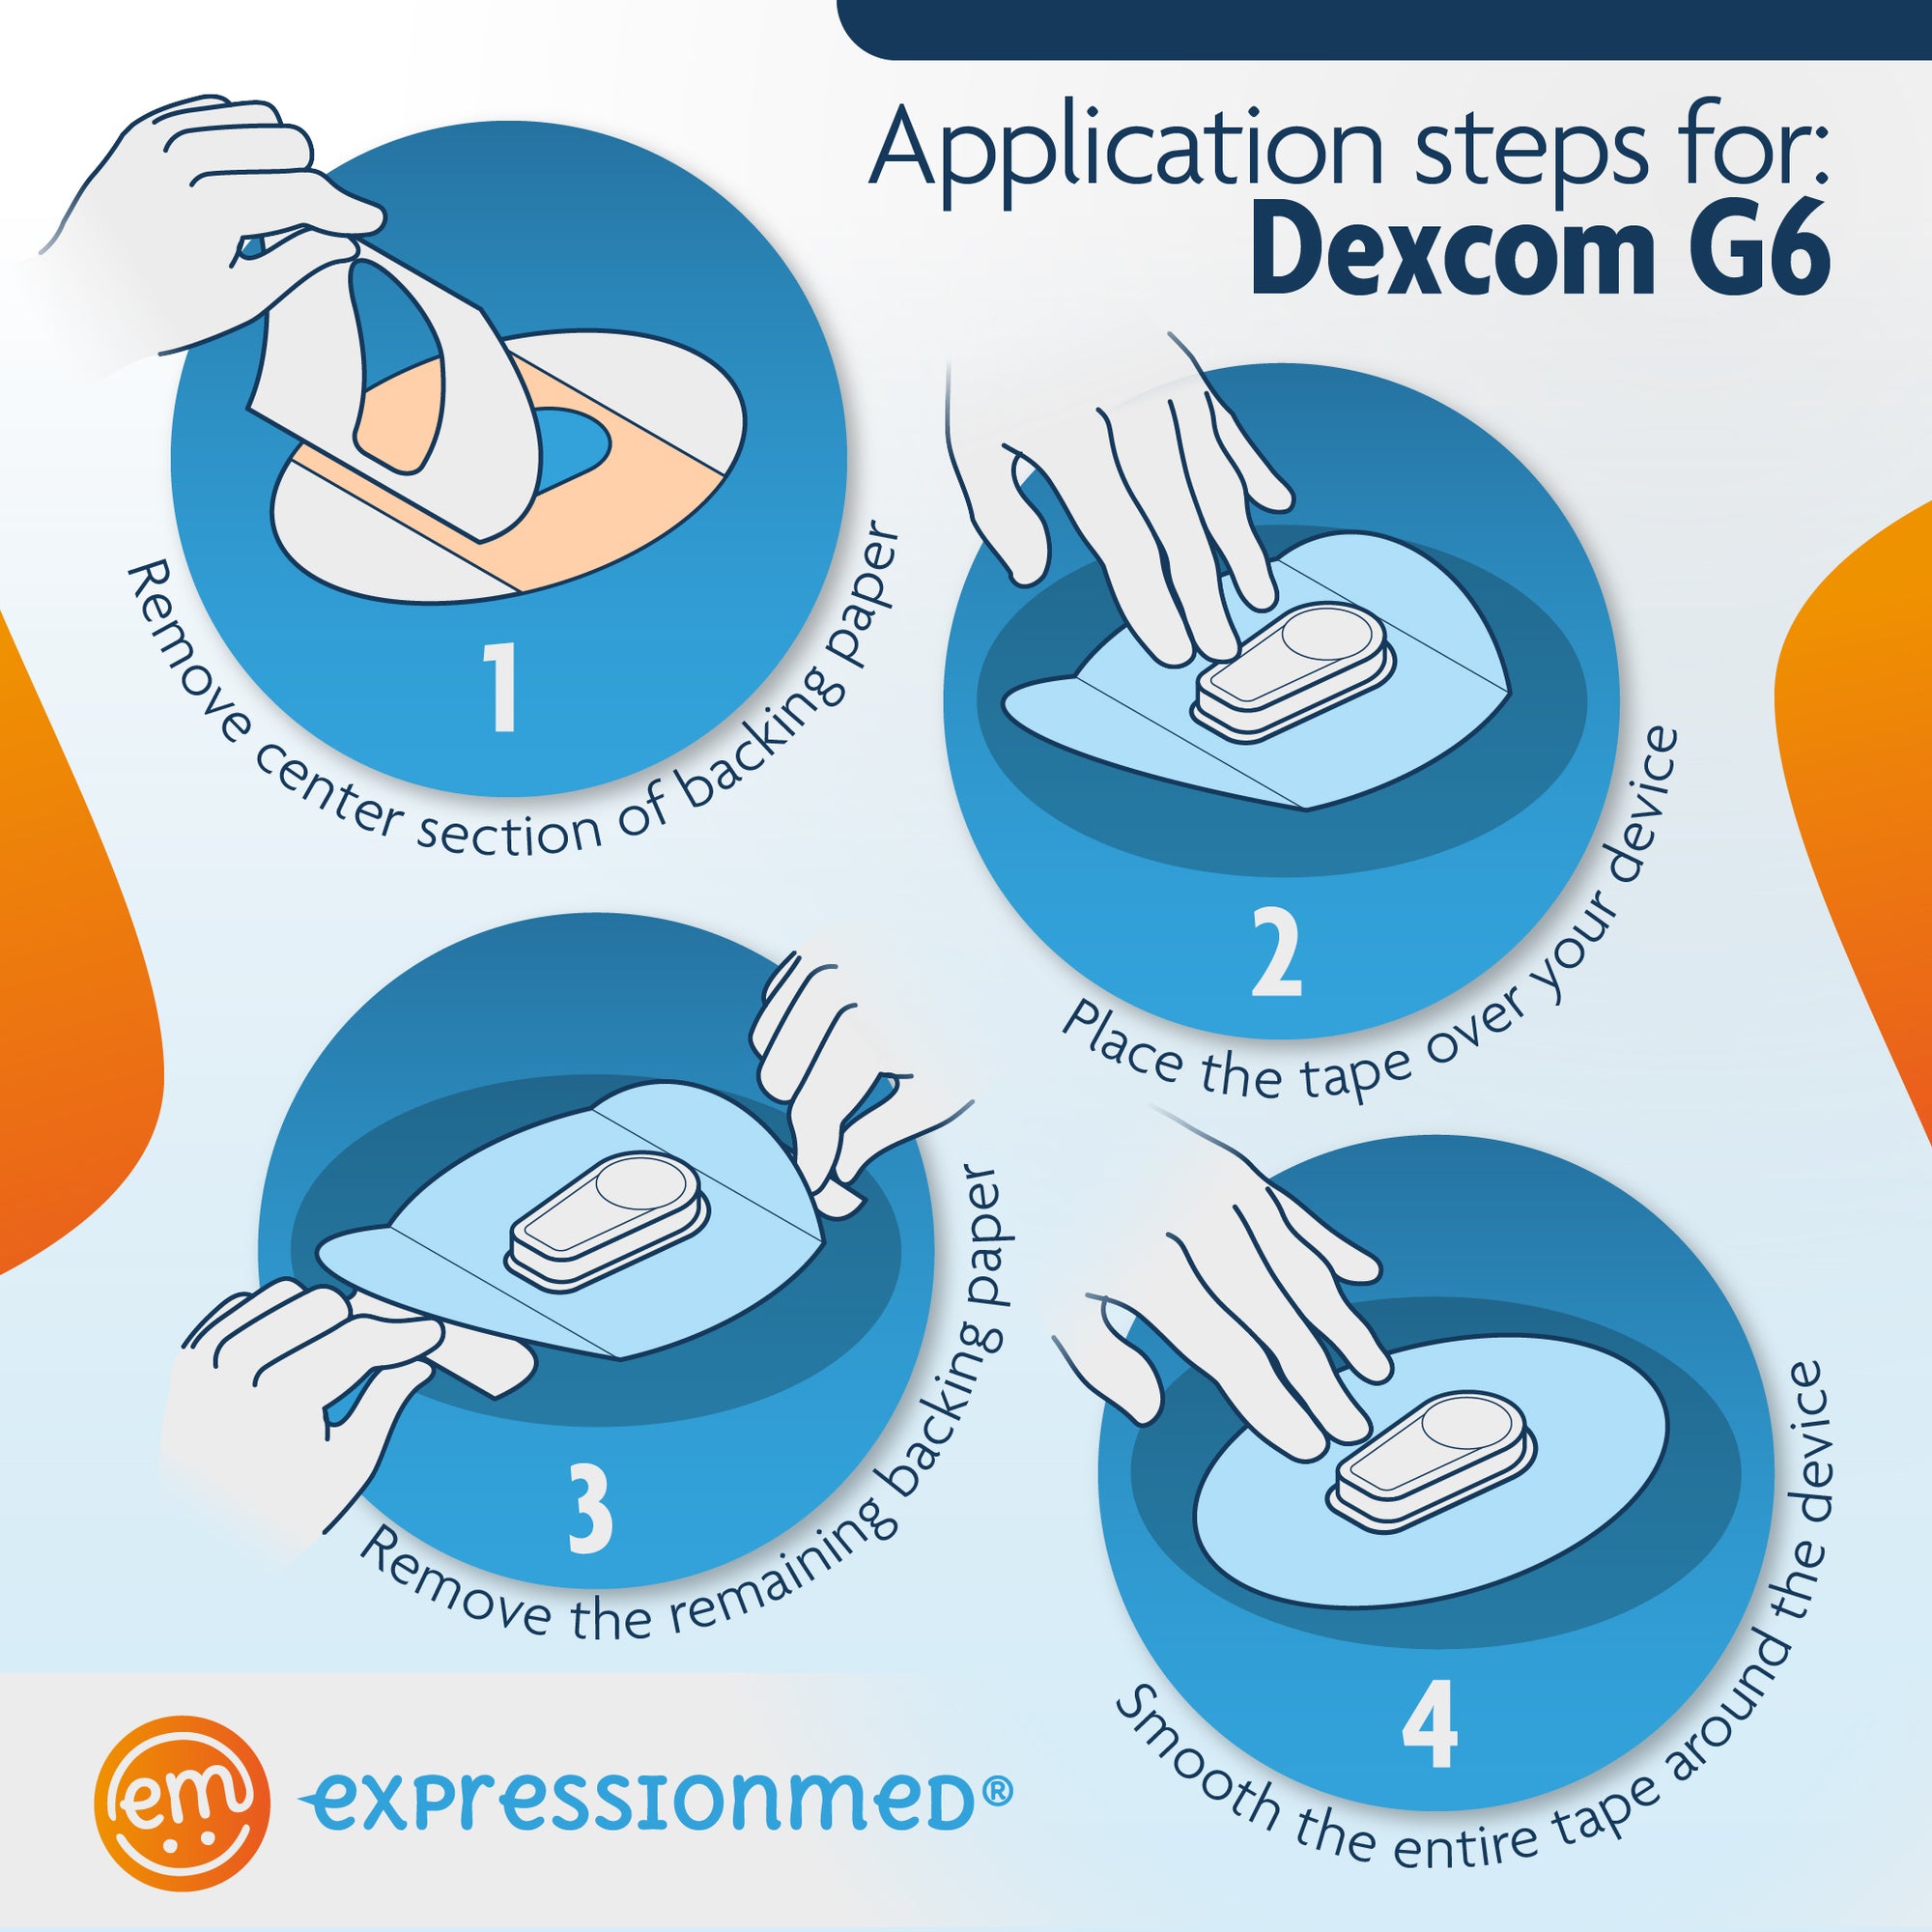 ExpressionMed Dexcom G6 Adhesive tape Application instructions